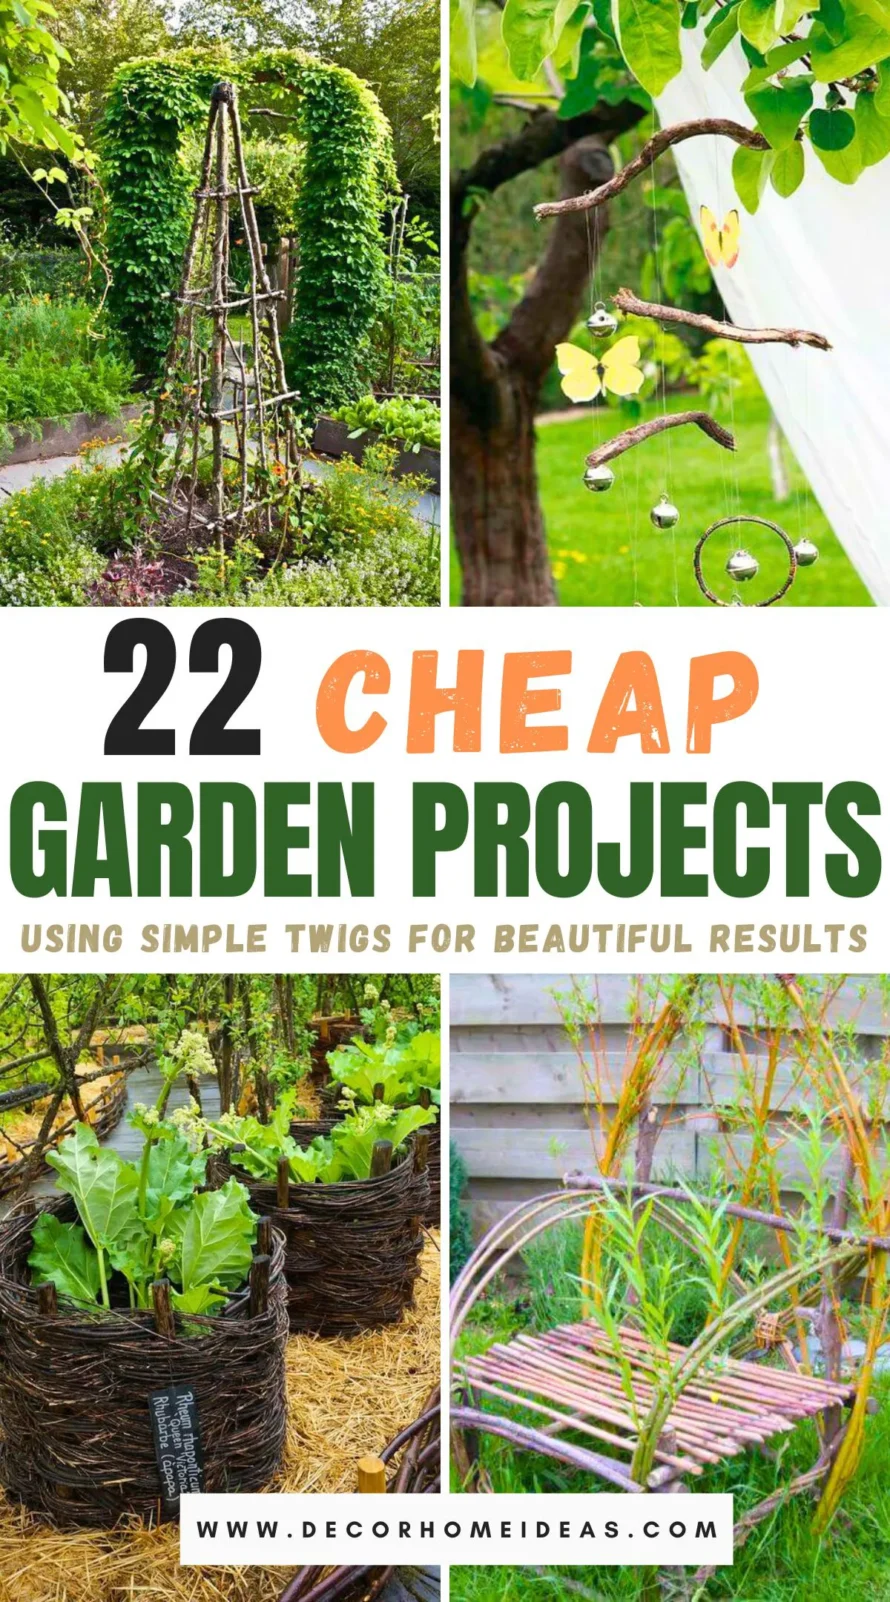 Transform your garden on a budget with these 22 brilliant projects using twigs. Discover creative ways to craft unique decor, from rustic fences to charming birdhouses. These easy and affordable ideas will add natural beauty and character to your outdoor space. Click to explore all the ingenious projects!